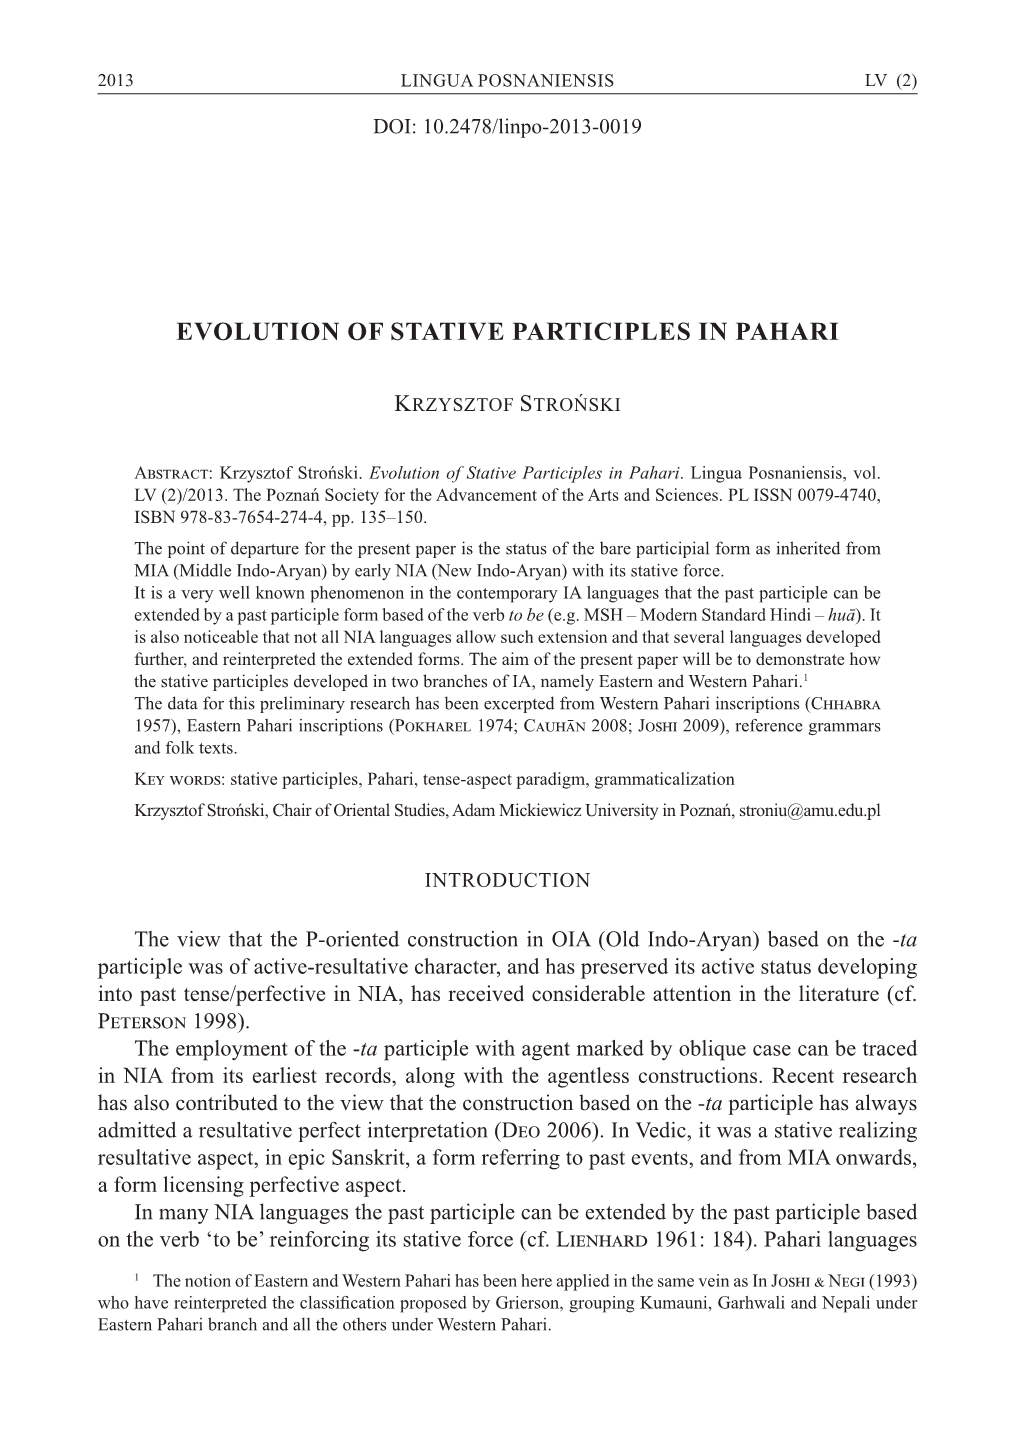 Evolution of Stative Participles in Pahari